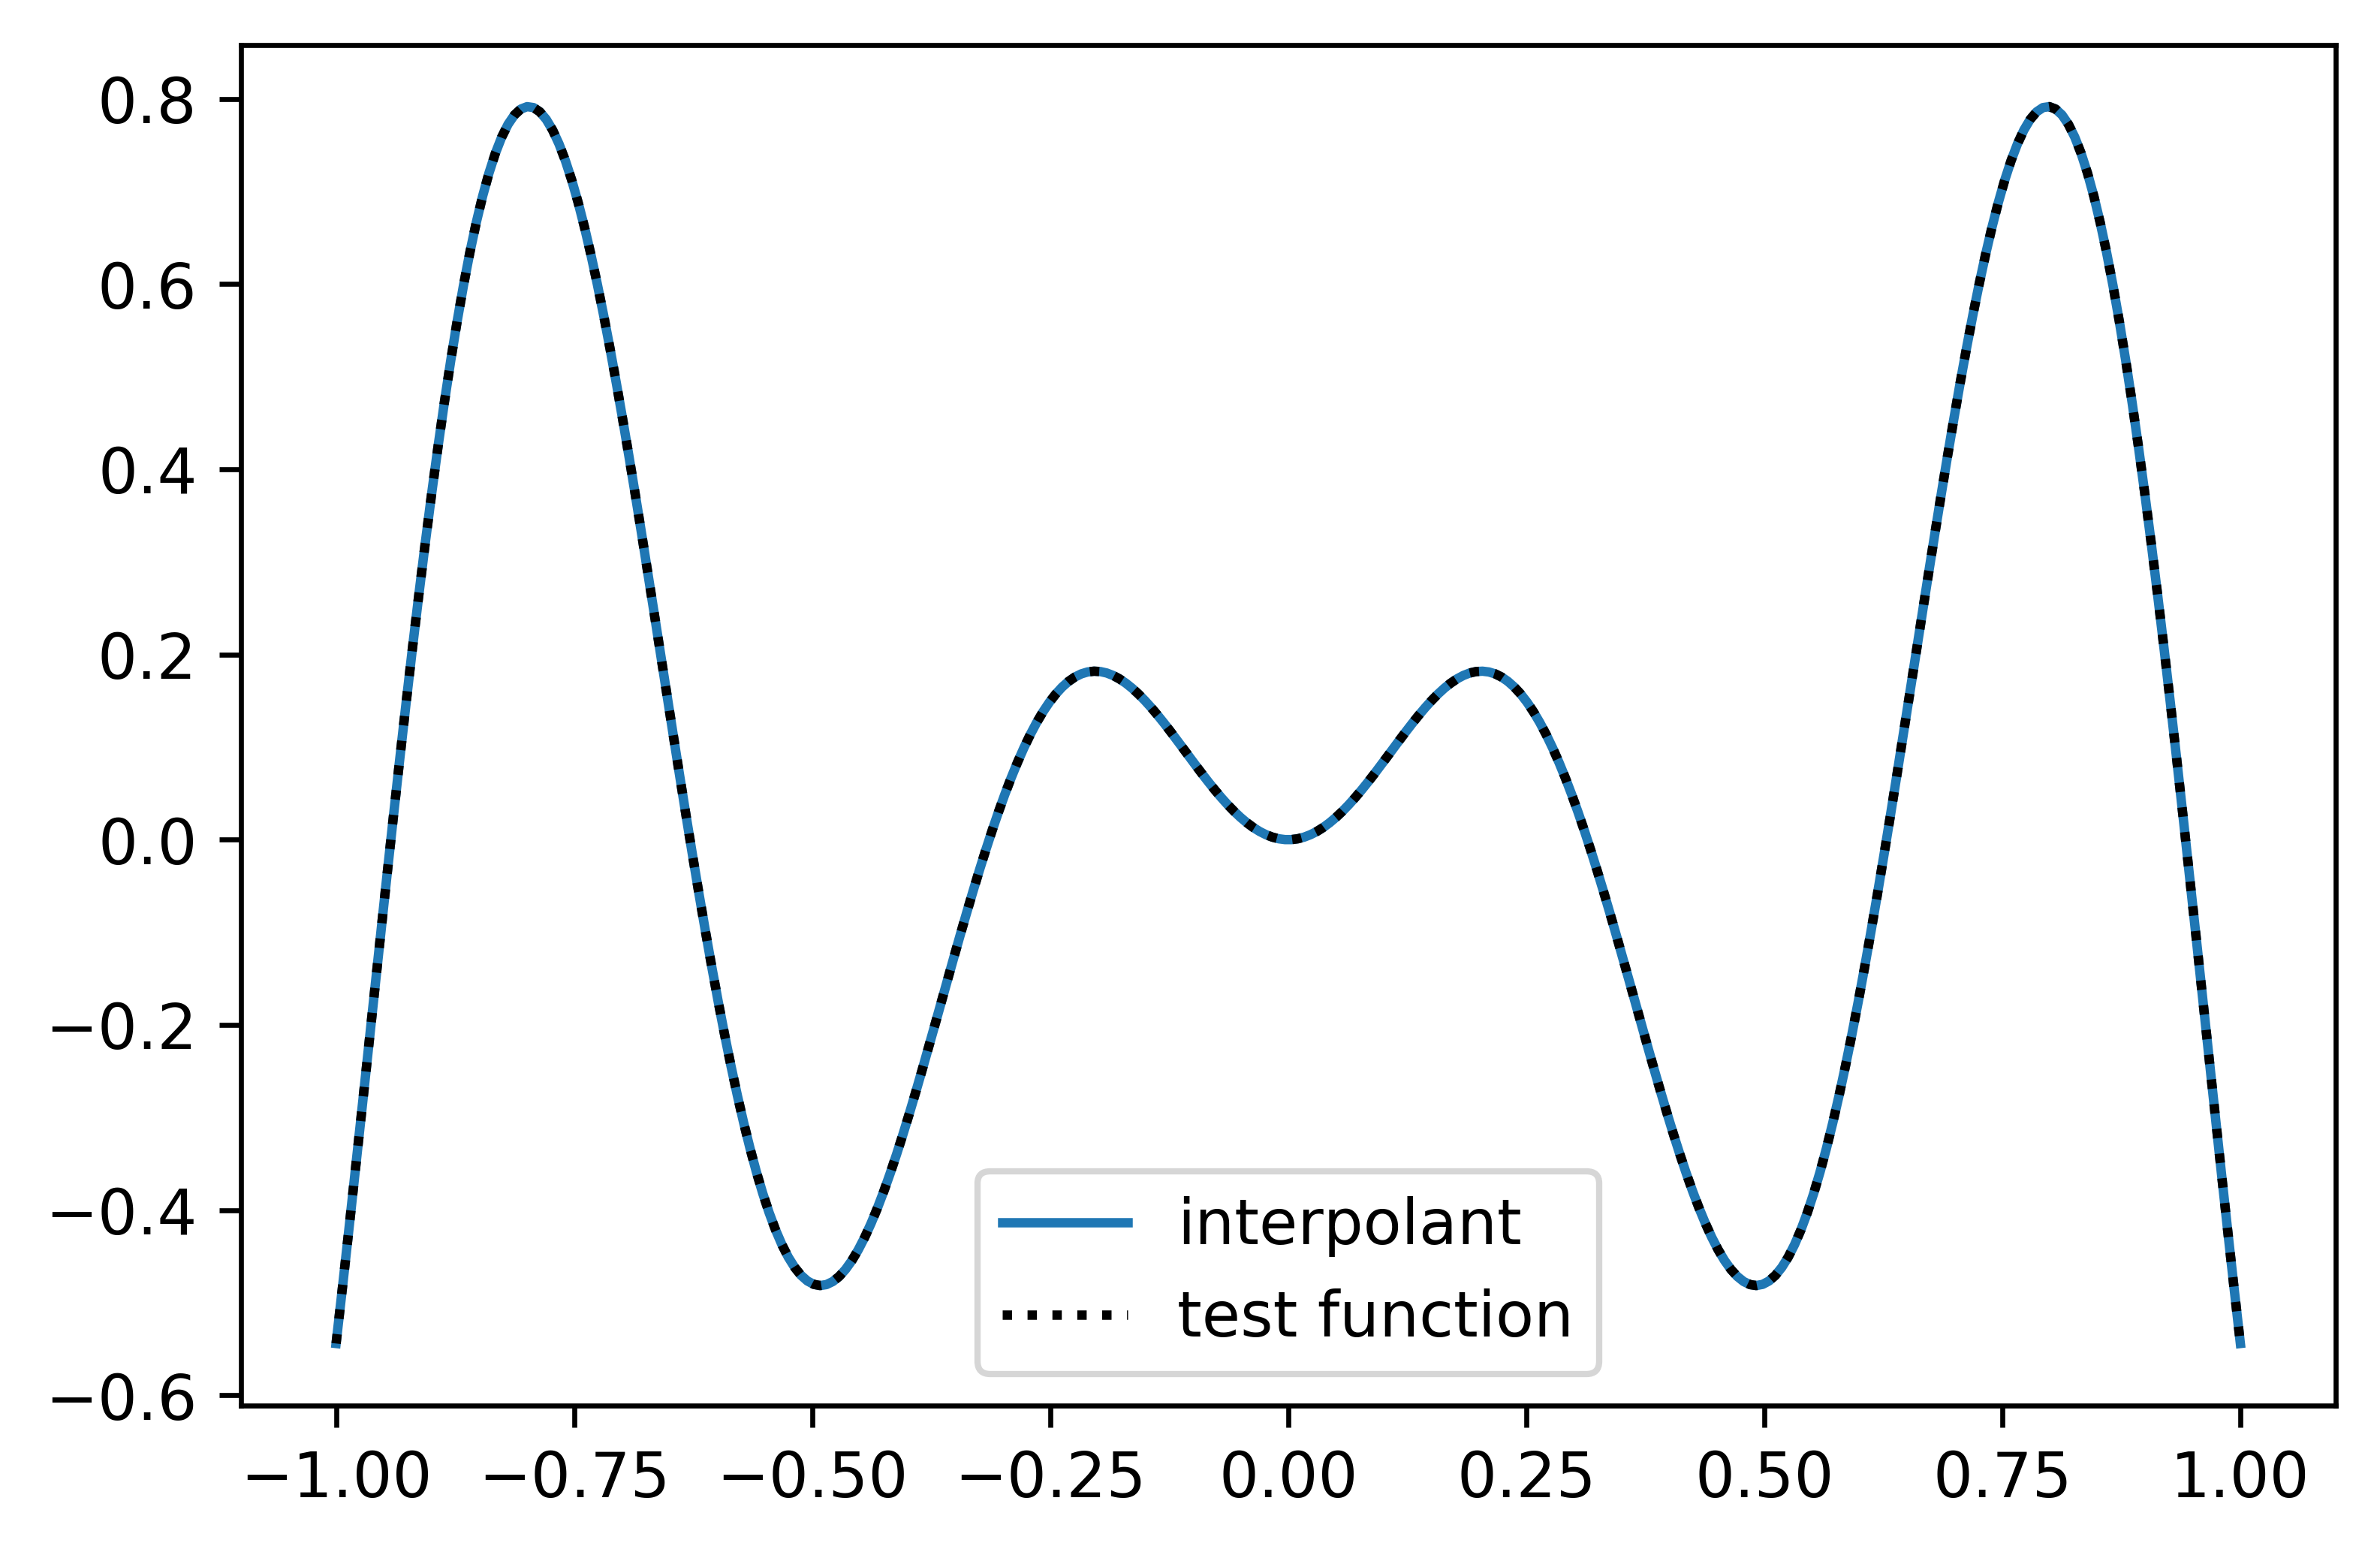 Compare test function with its interpolant